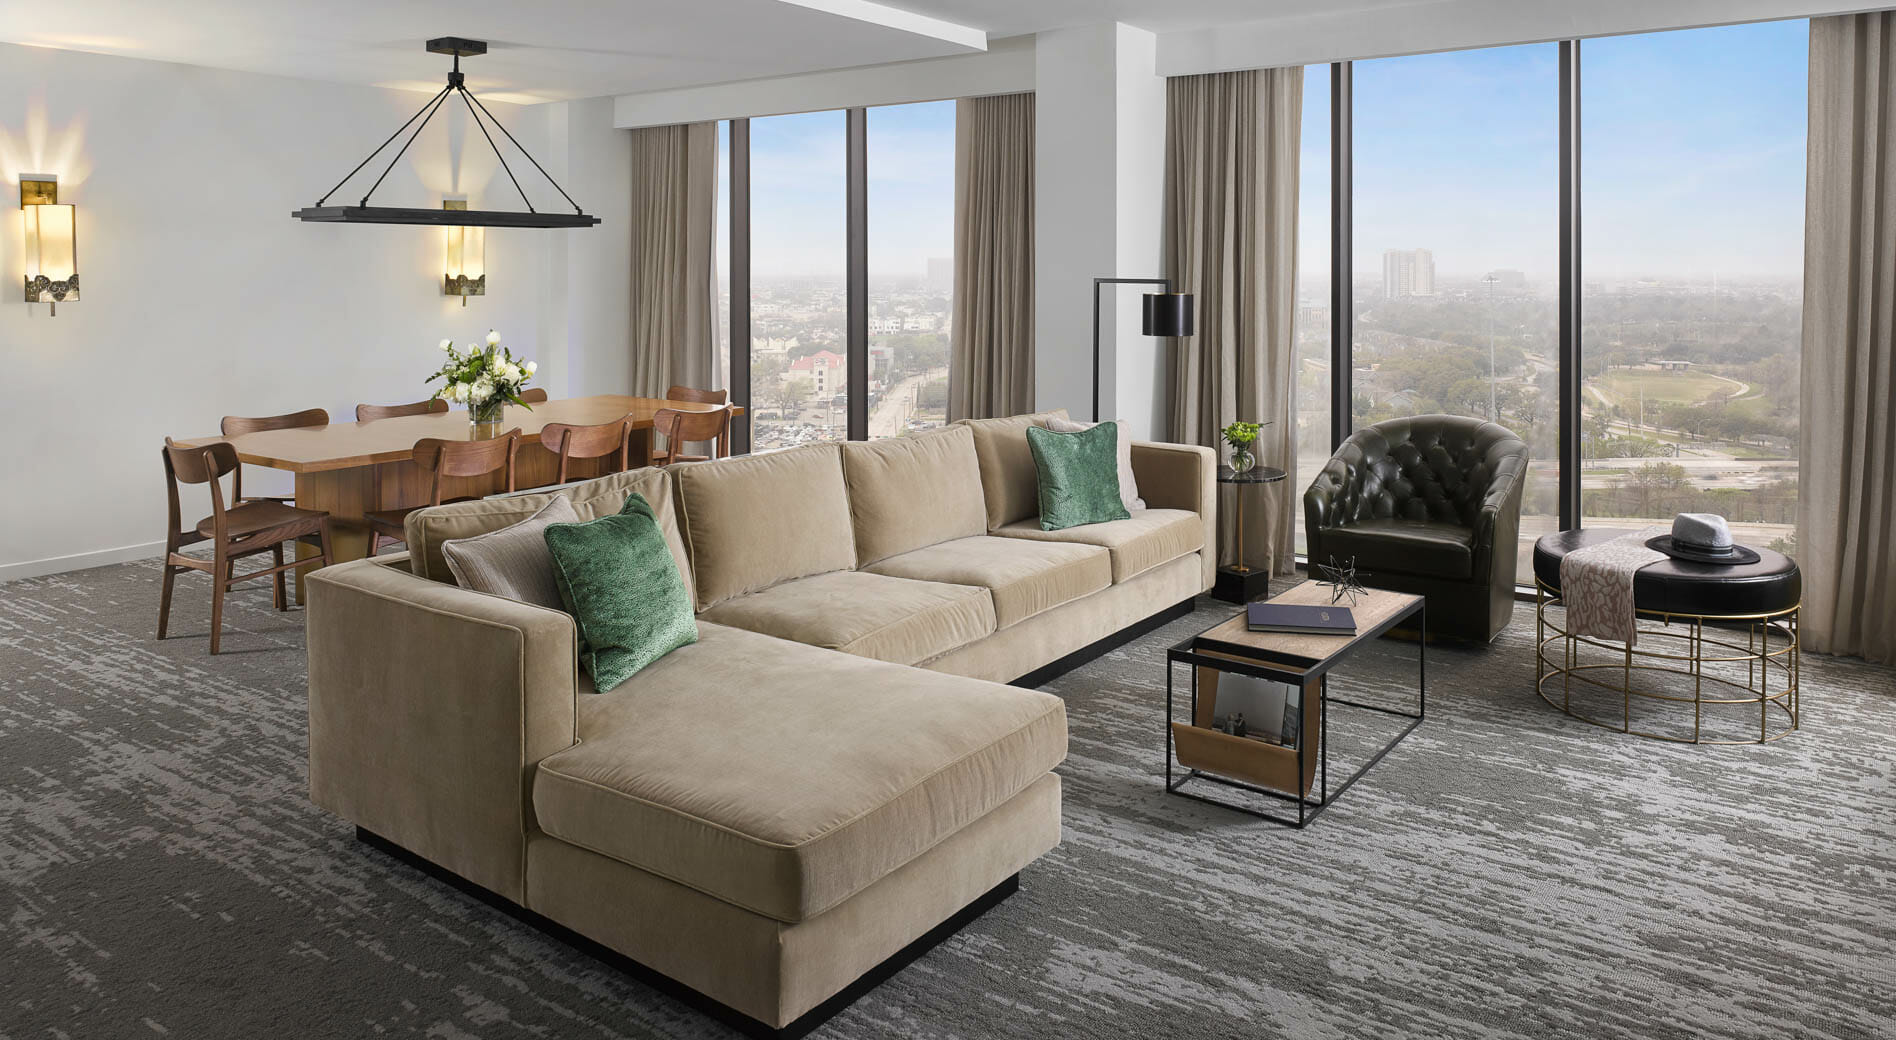 Spacious Presidential Suite living room with floor to ceiling windows, tan sectional in seating area and dining table behind it.